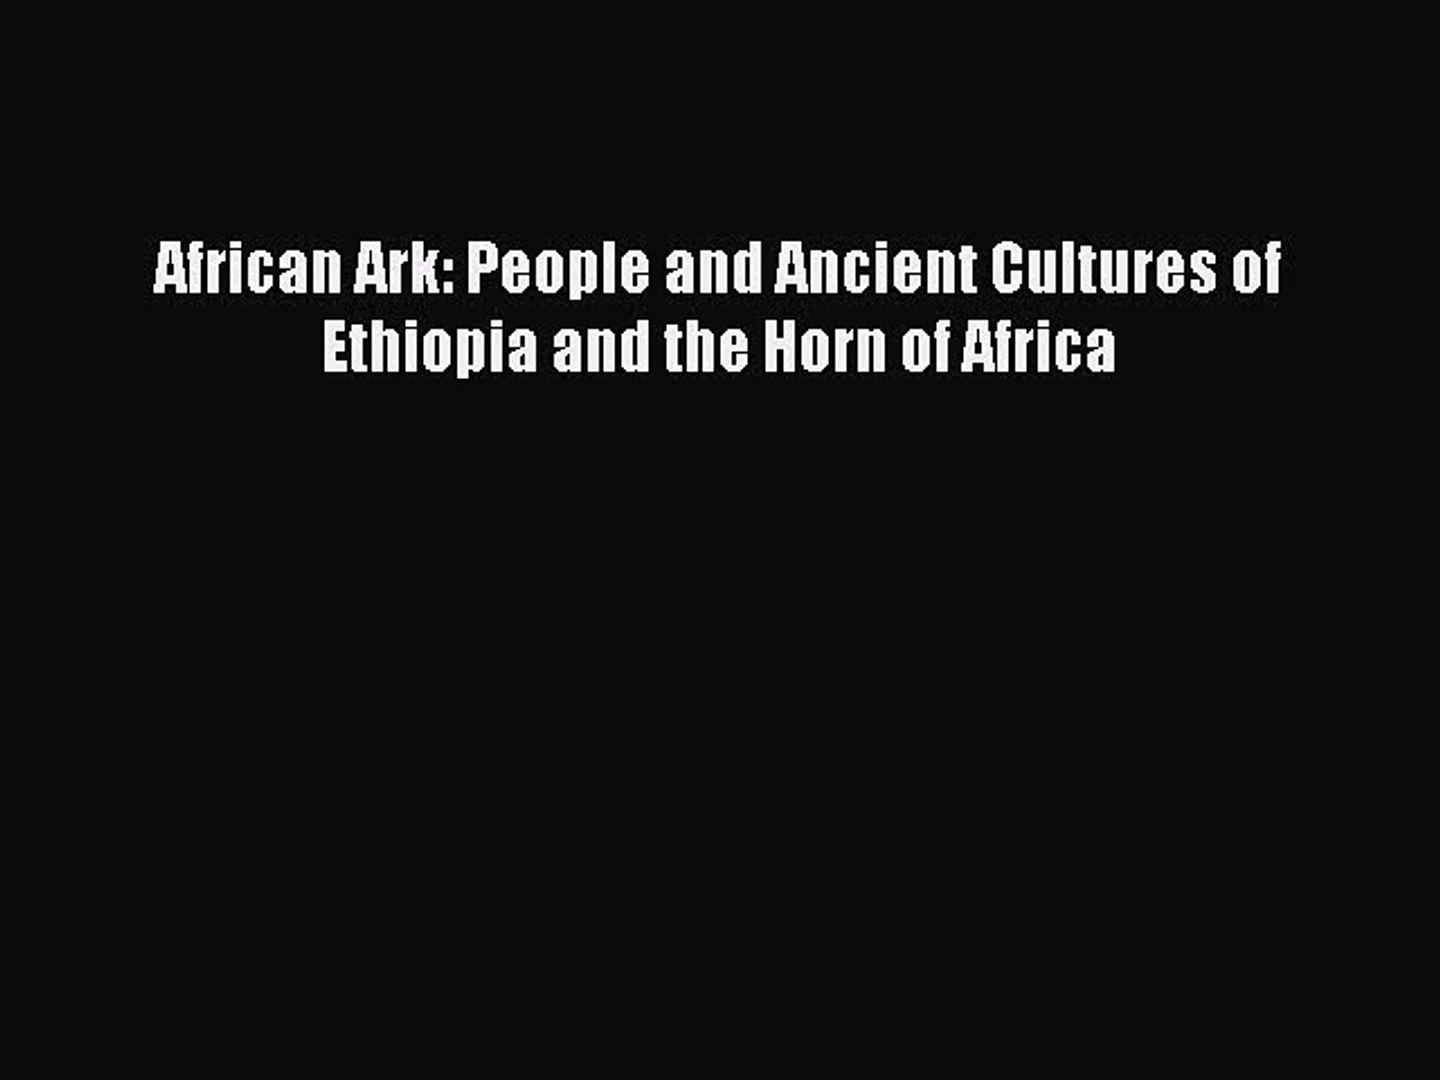 Book African Ark: People and Ancient Cultures of Ethiopia and the Horn of Africa Read Full